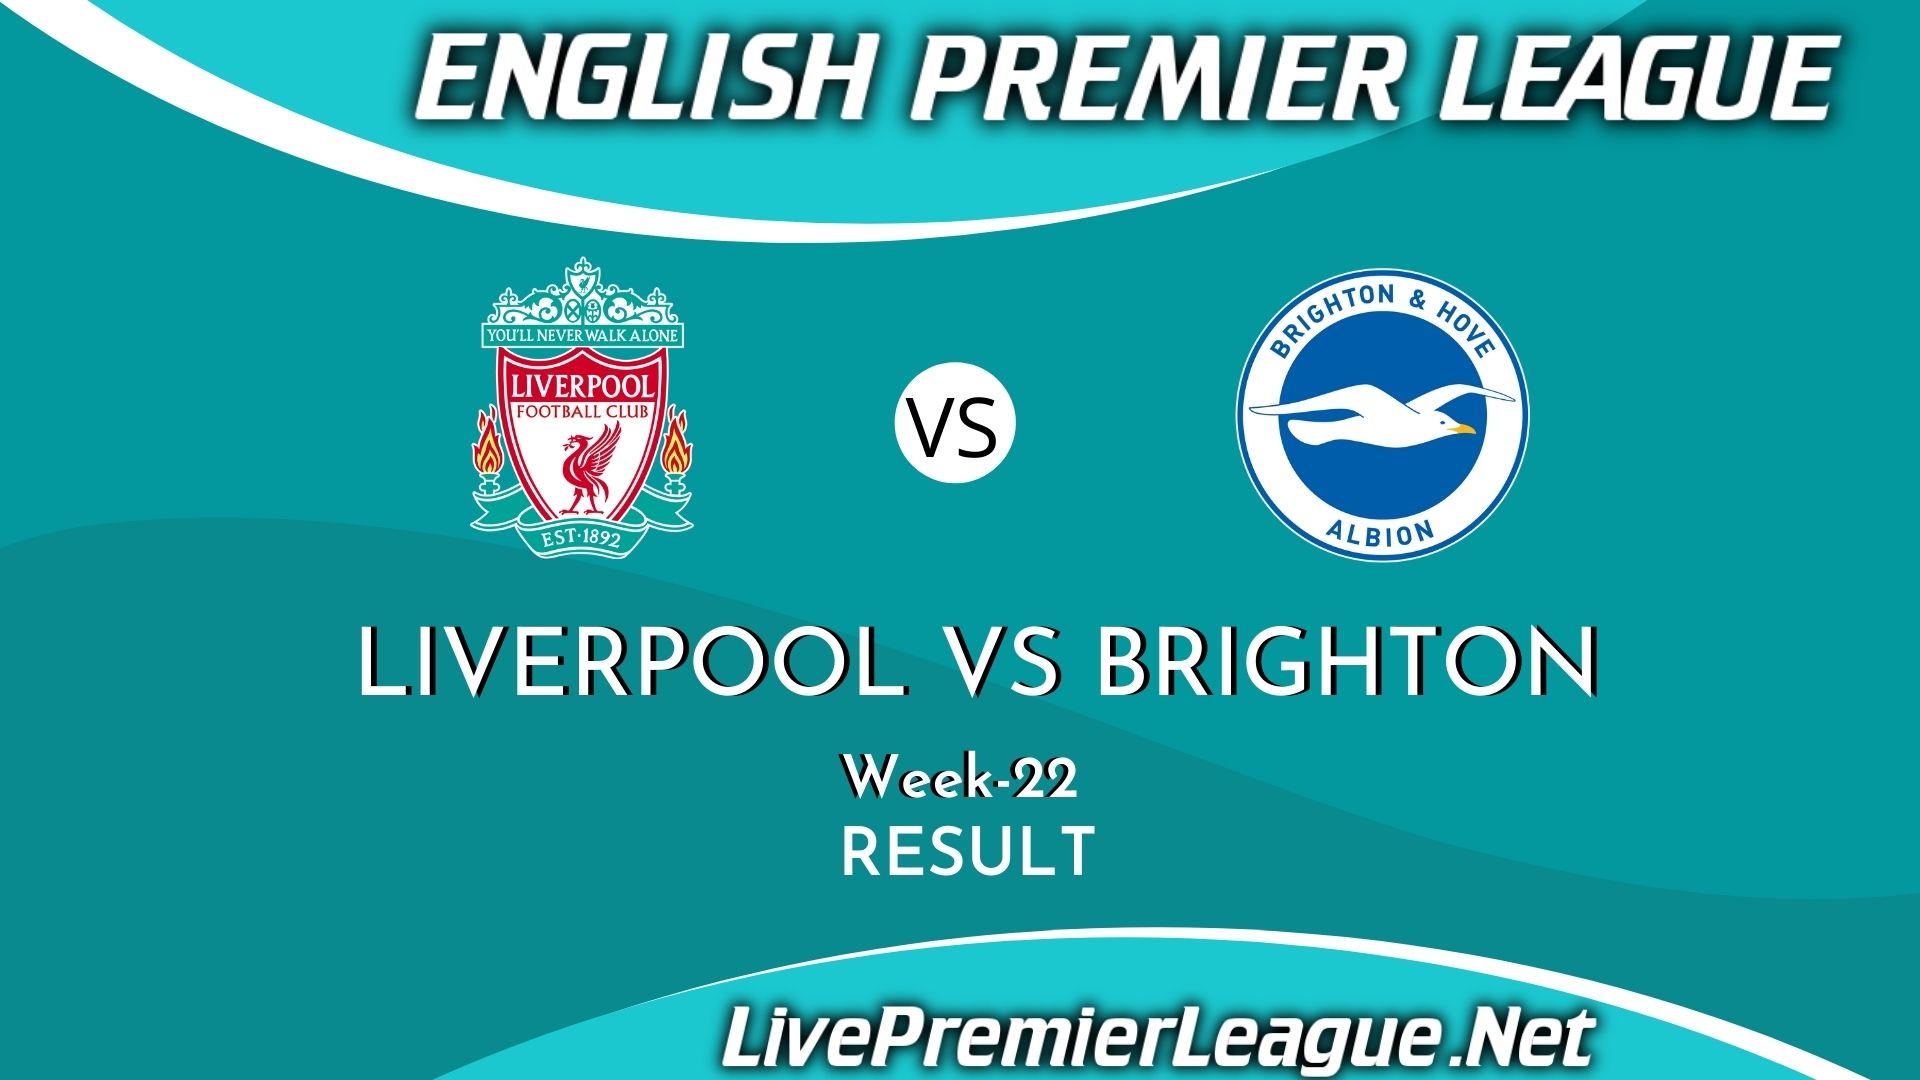 Liverpool Vs Brighton and Hove Albion | Result 2021 EPL Week 22